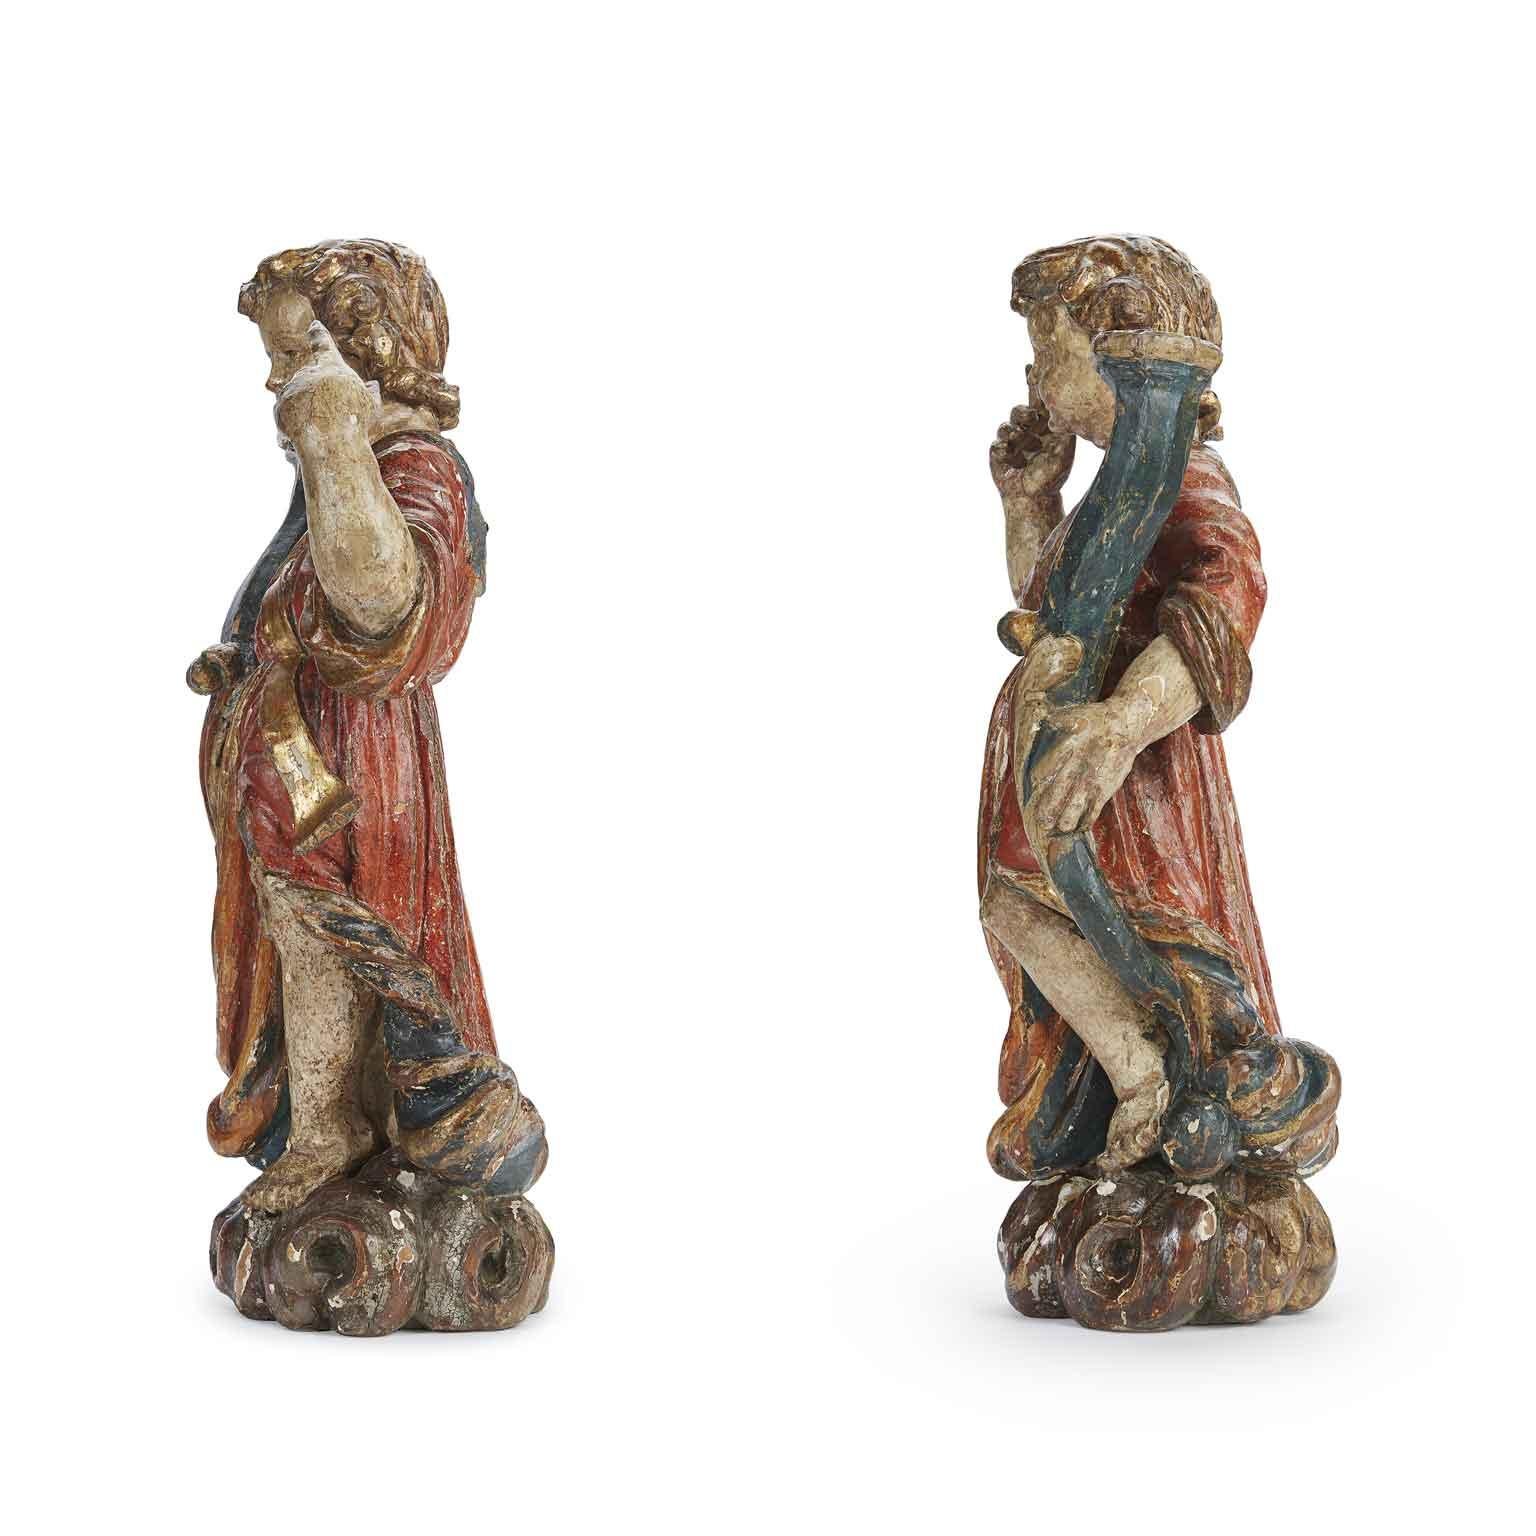 Hand-Carved Pair of Carved Lacquered and Gilded Candle Holder Angels Italian Sculptures 1650s For Sale